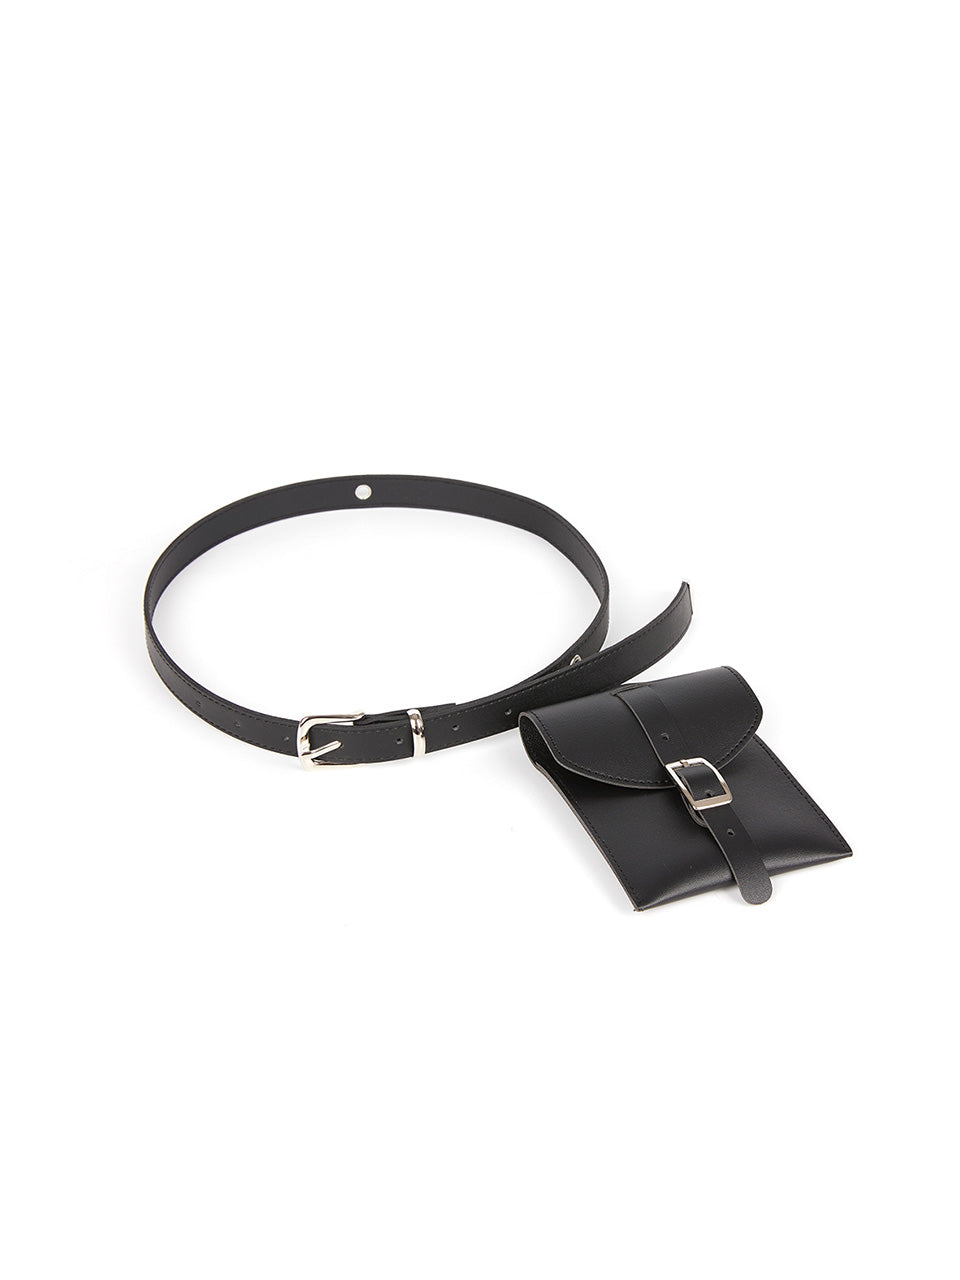 AT-492 Belt with Pouch